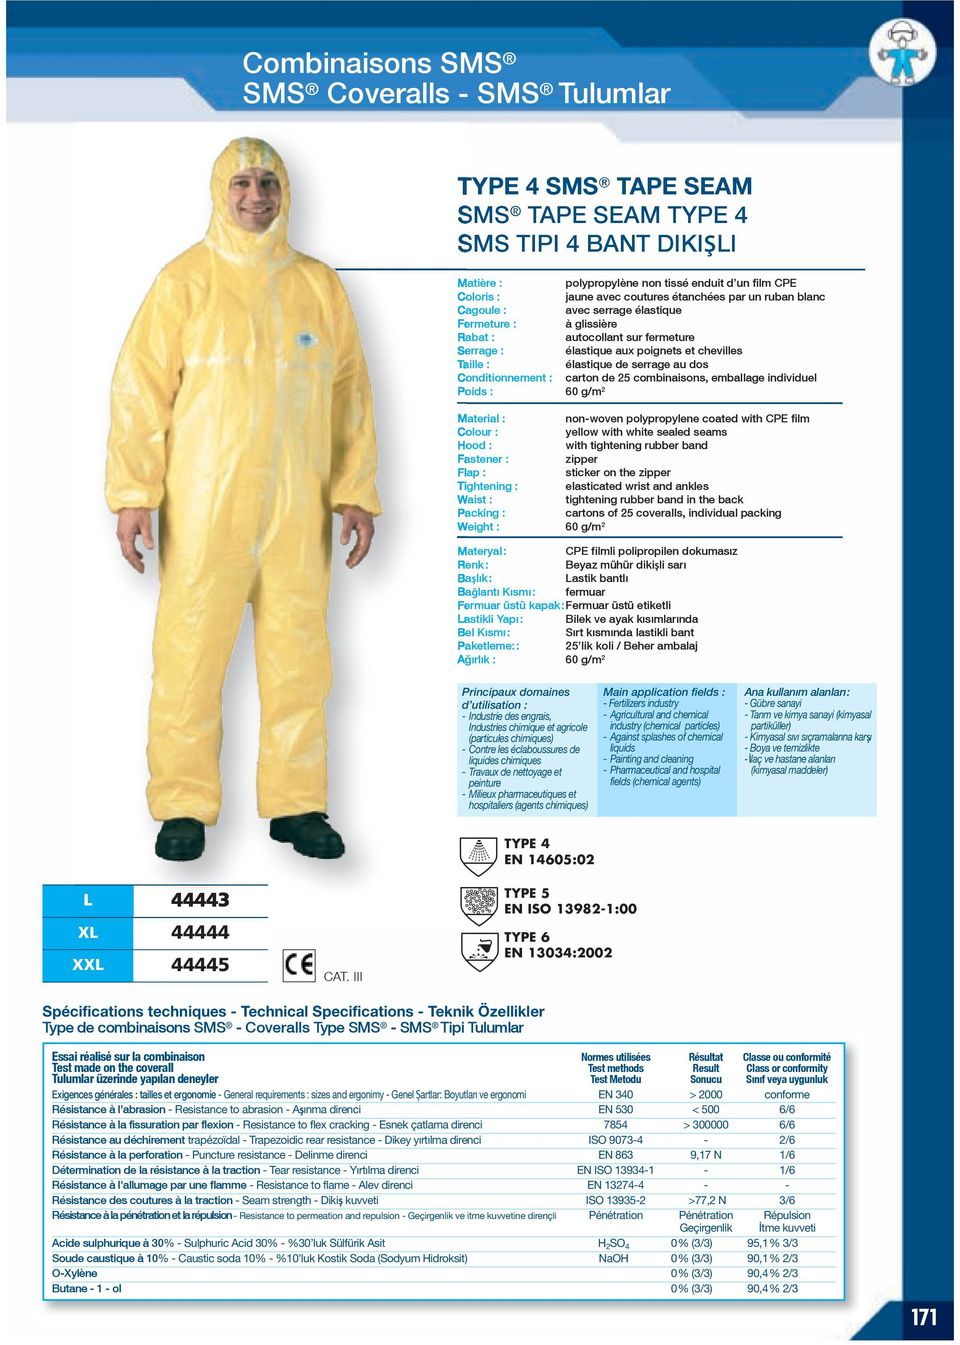 serrage au dos Conditionnement : carton de 25 combinaisons, emballage individuel Poids : 60 g/m 2 non-woven polypropylene coated with CPE film yellow with sealed seams Hood : with tightening rubber